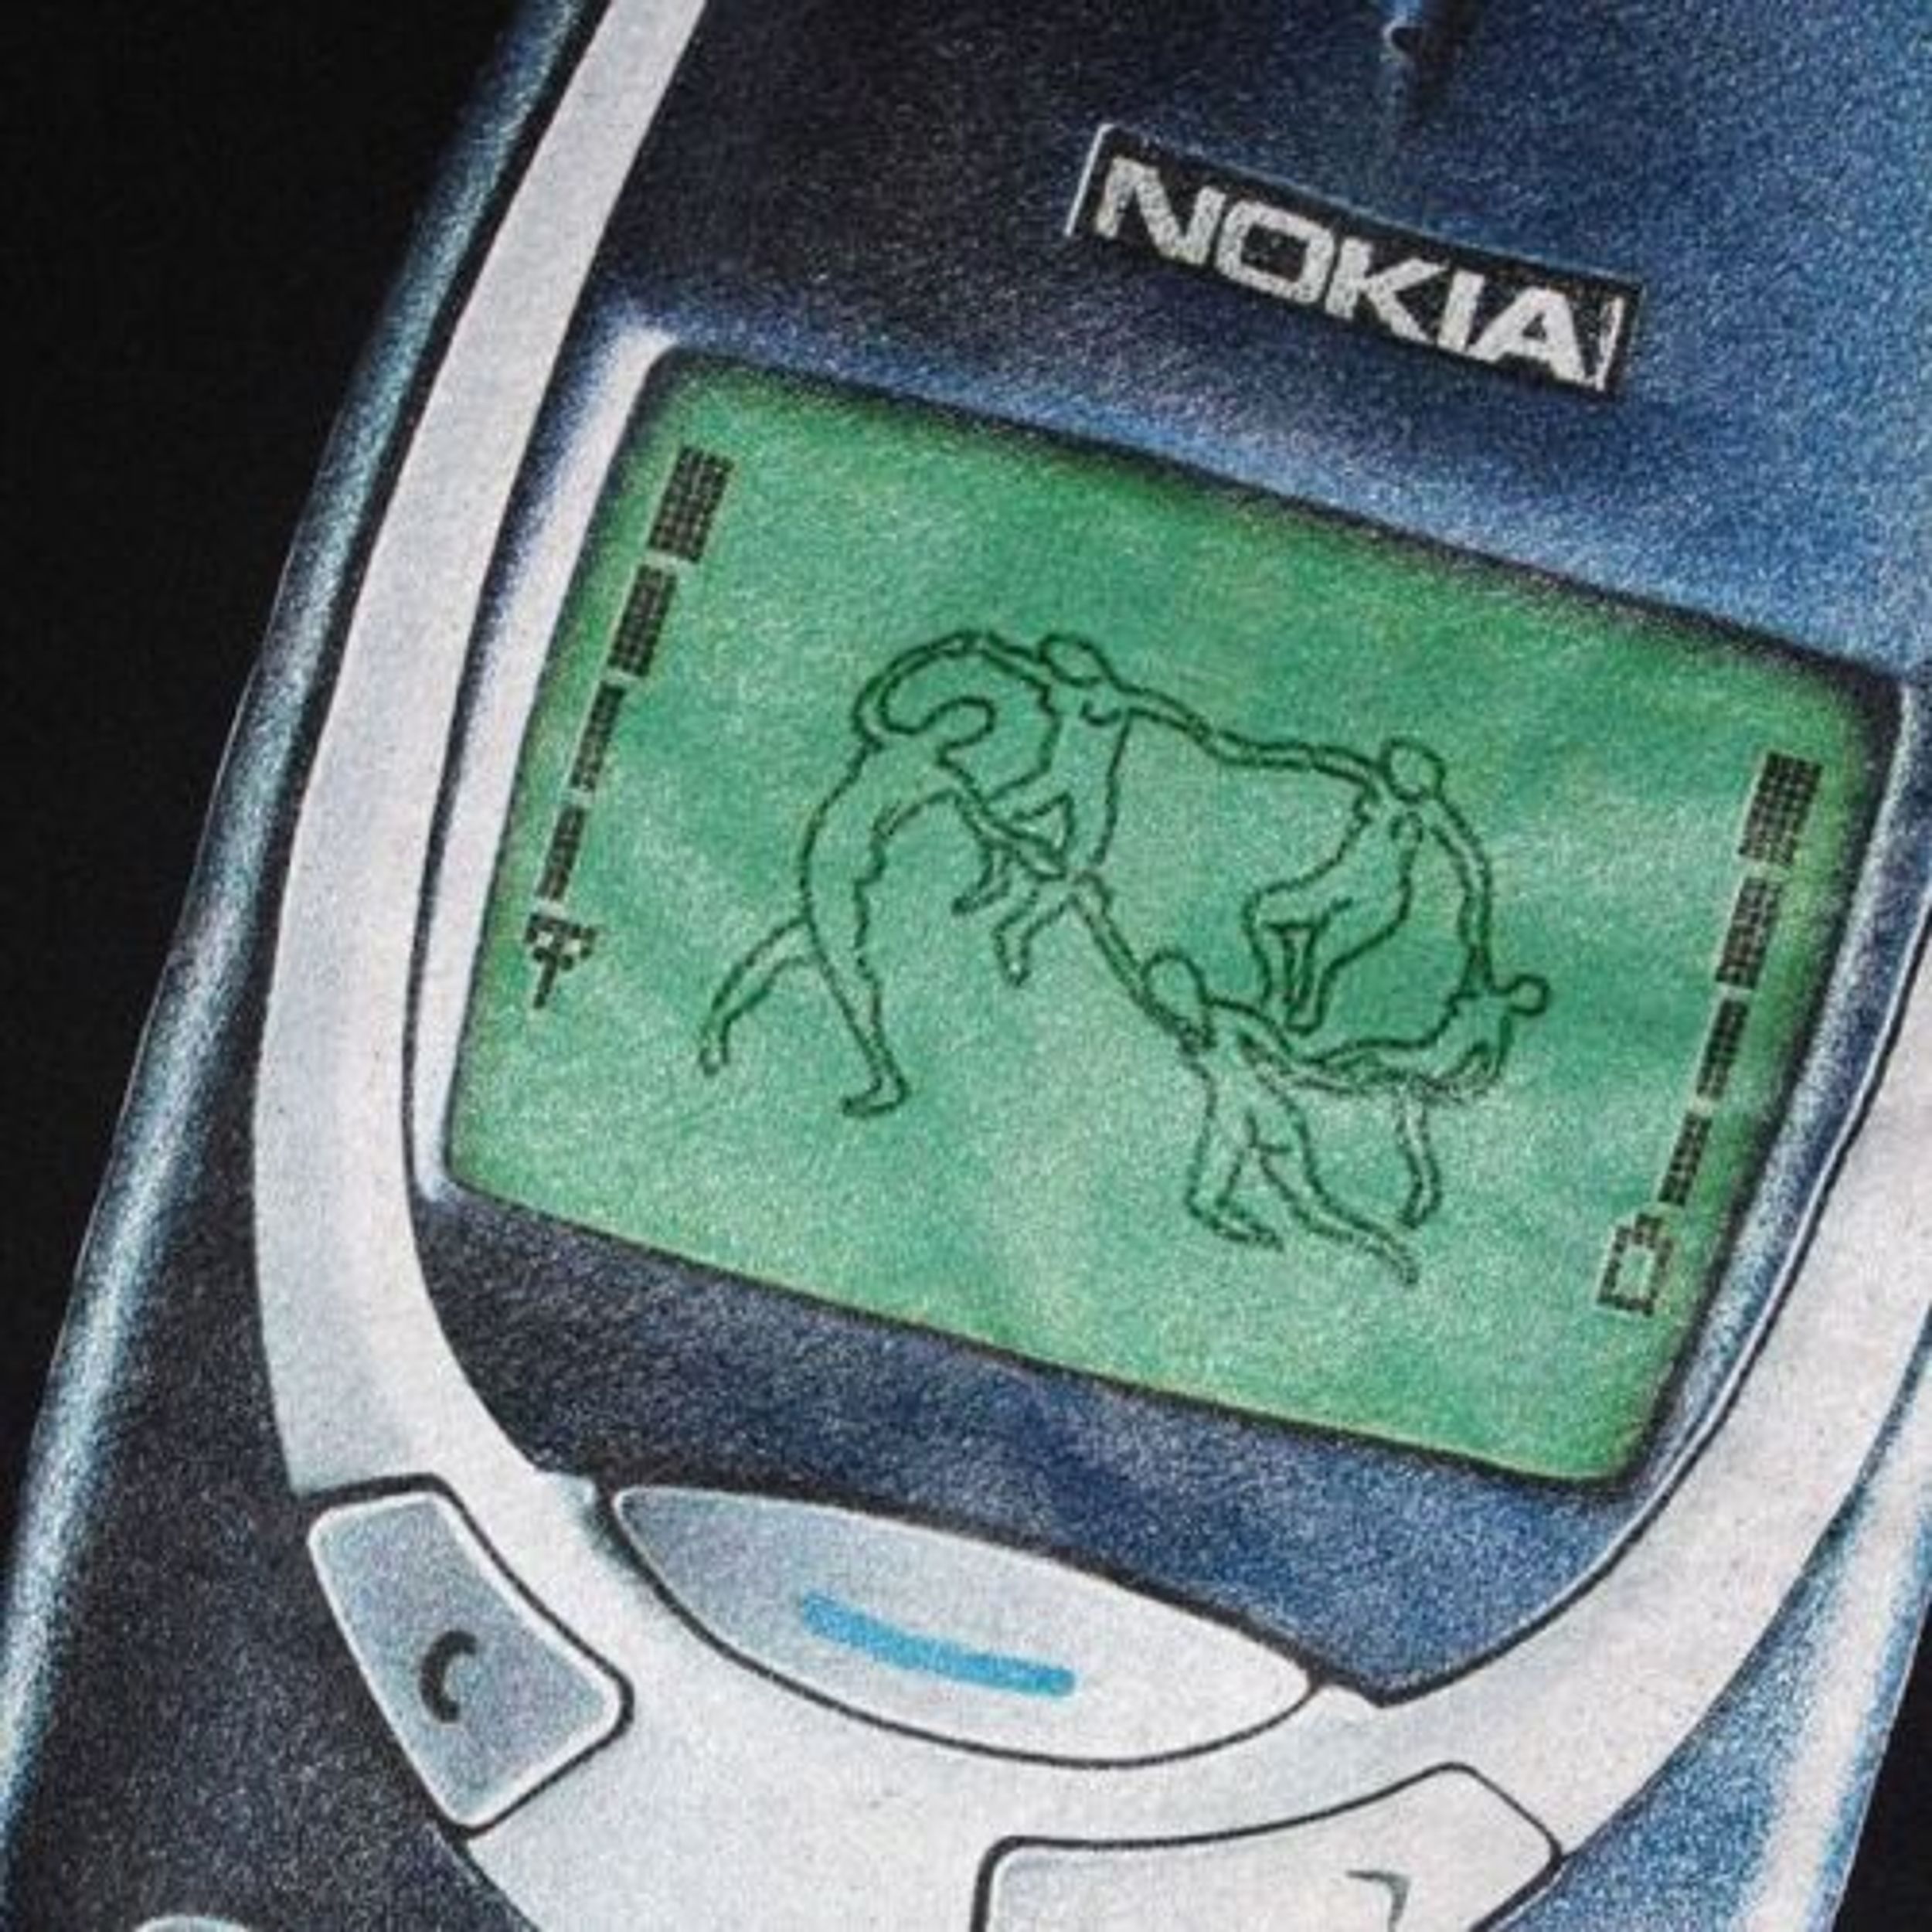 The Dance by Henri Matisse, imagined on the screen of a Nokia 3310 mobile phone.